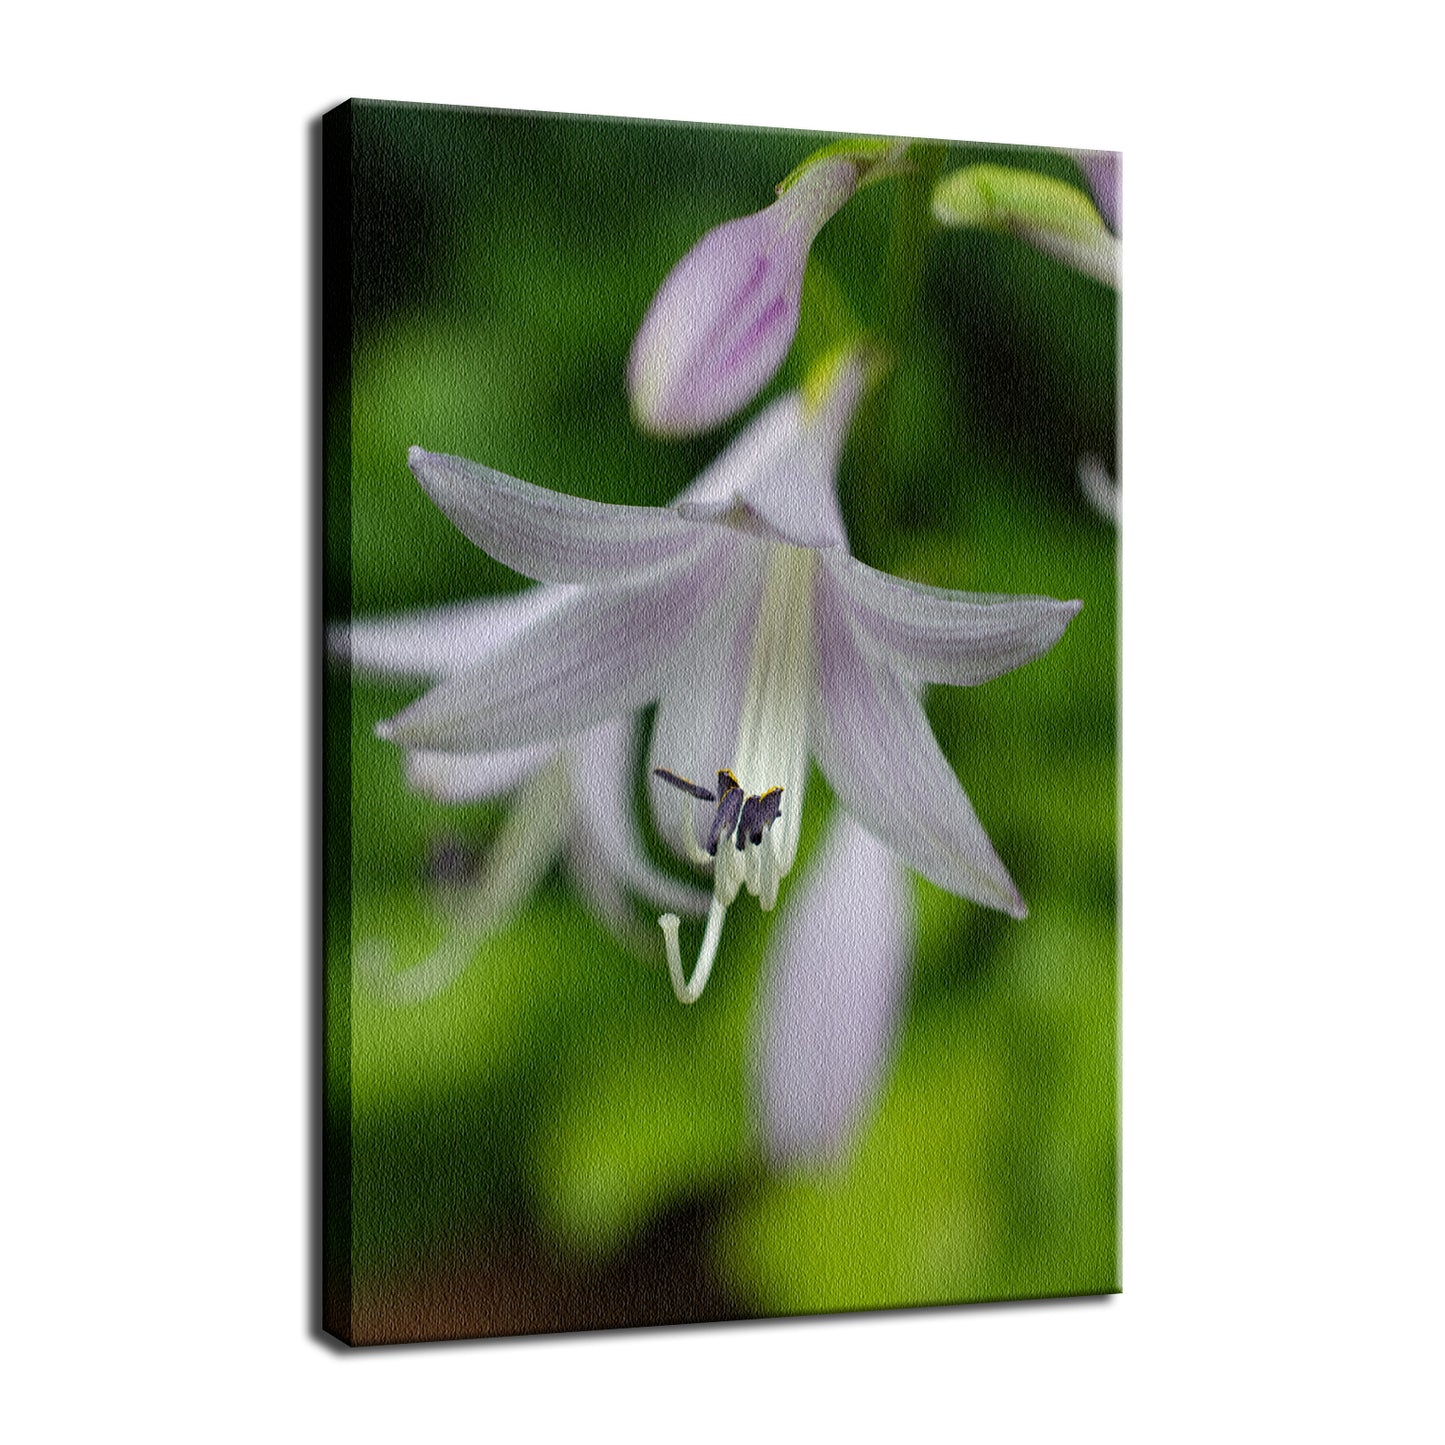 Hosta Bloom Nature / Floral Photo Fine Art Canvas Wall Art Prints  - PIPAFINEART